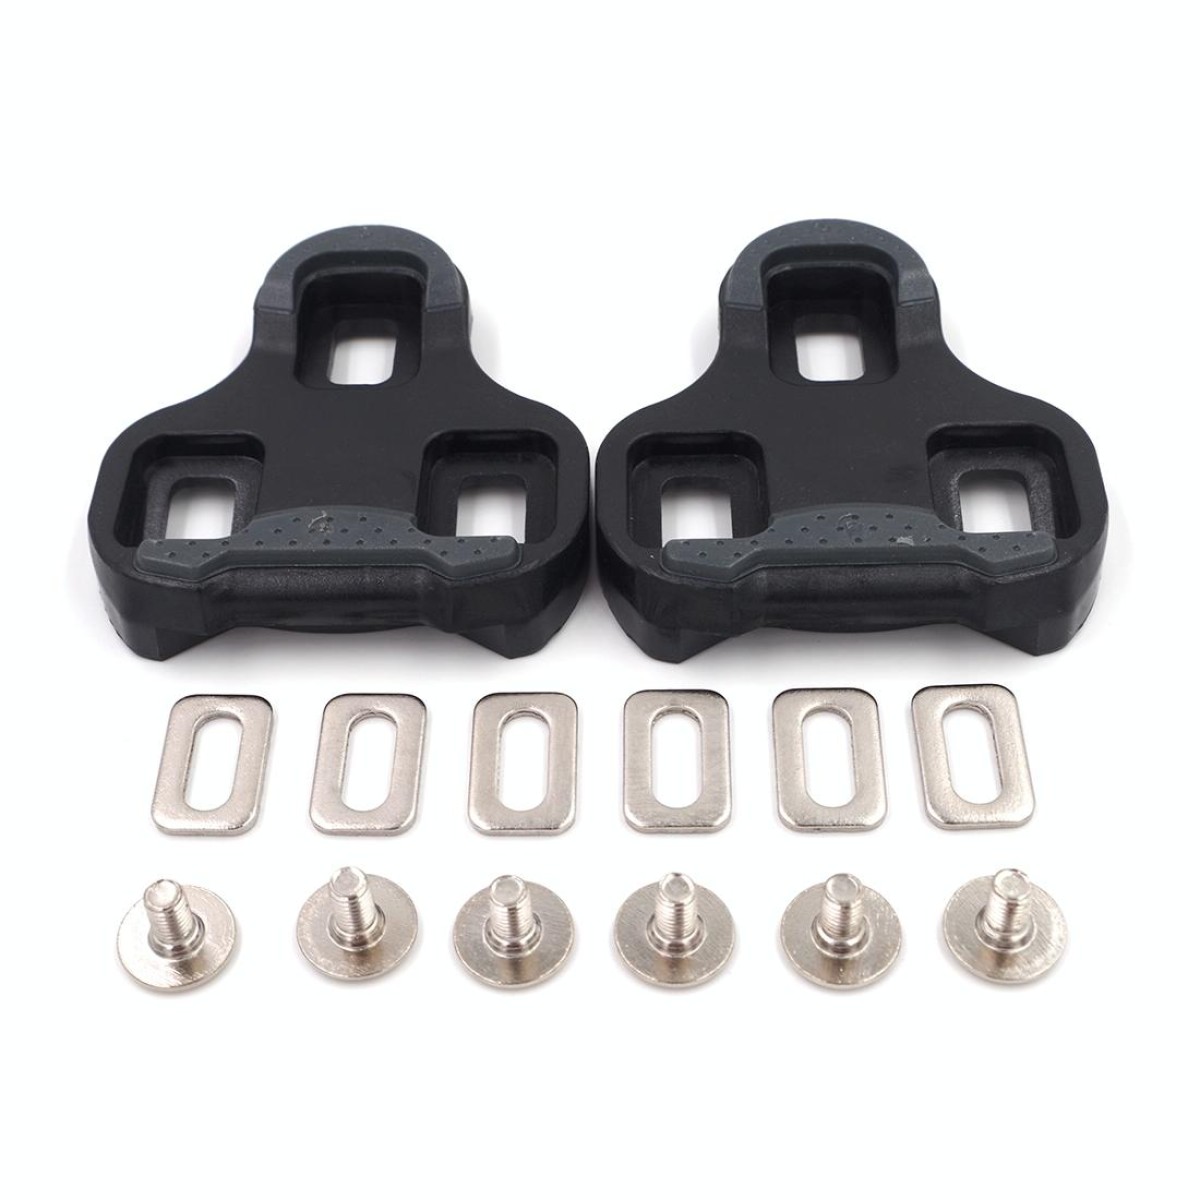 2 PCS RD3-C Road Bike Cleats 6 Degree Float Self-locking Cycling Pedal Cleat for LOOK KEO Road Cleats Fit Most Road Bicycle Shoes(Black)